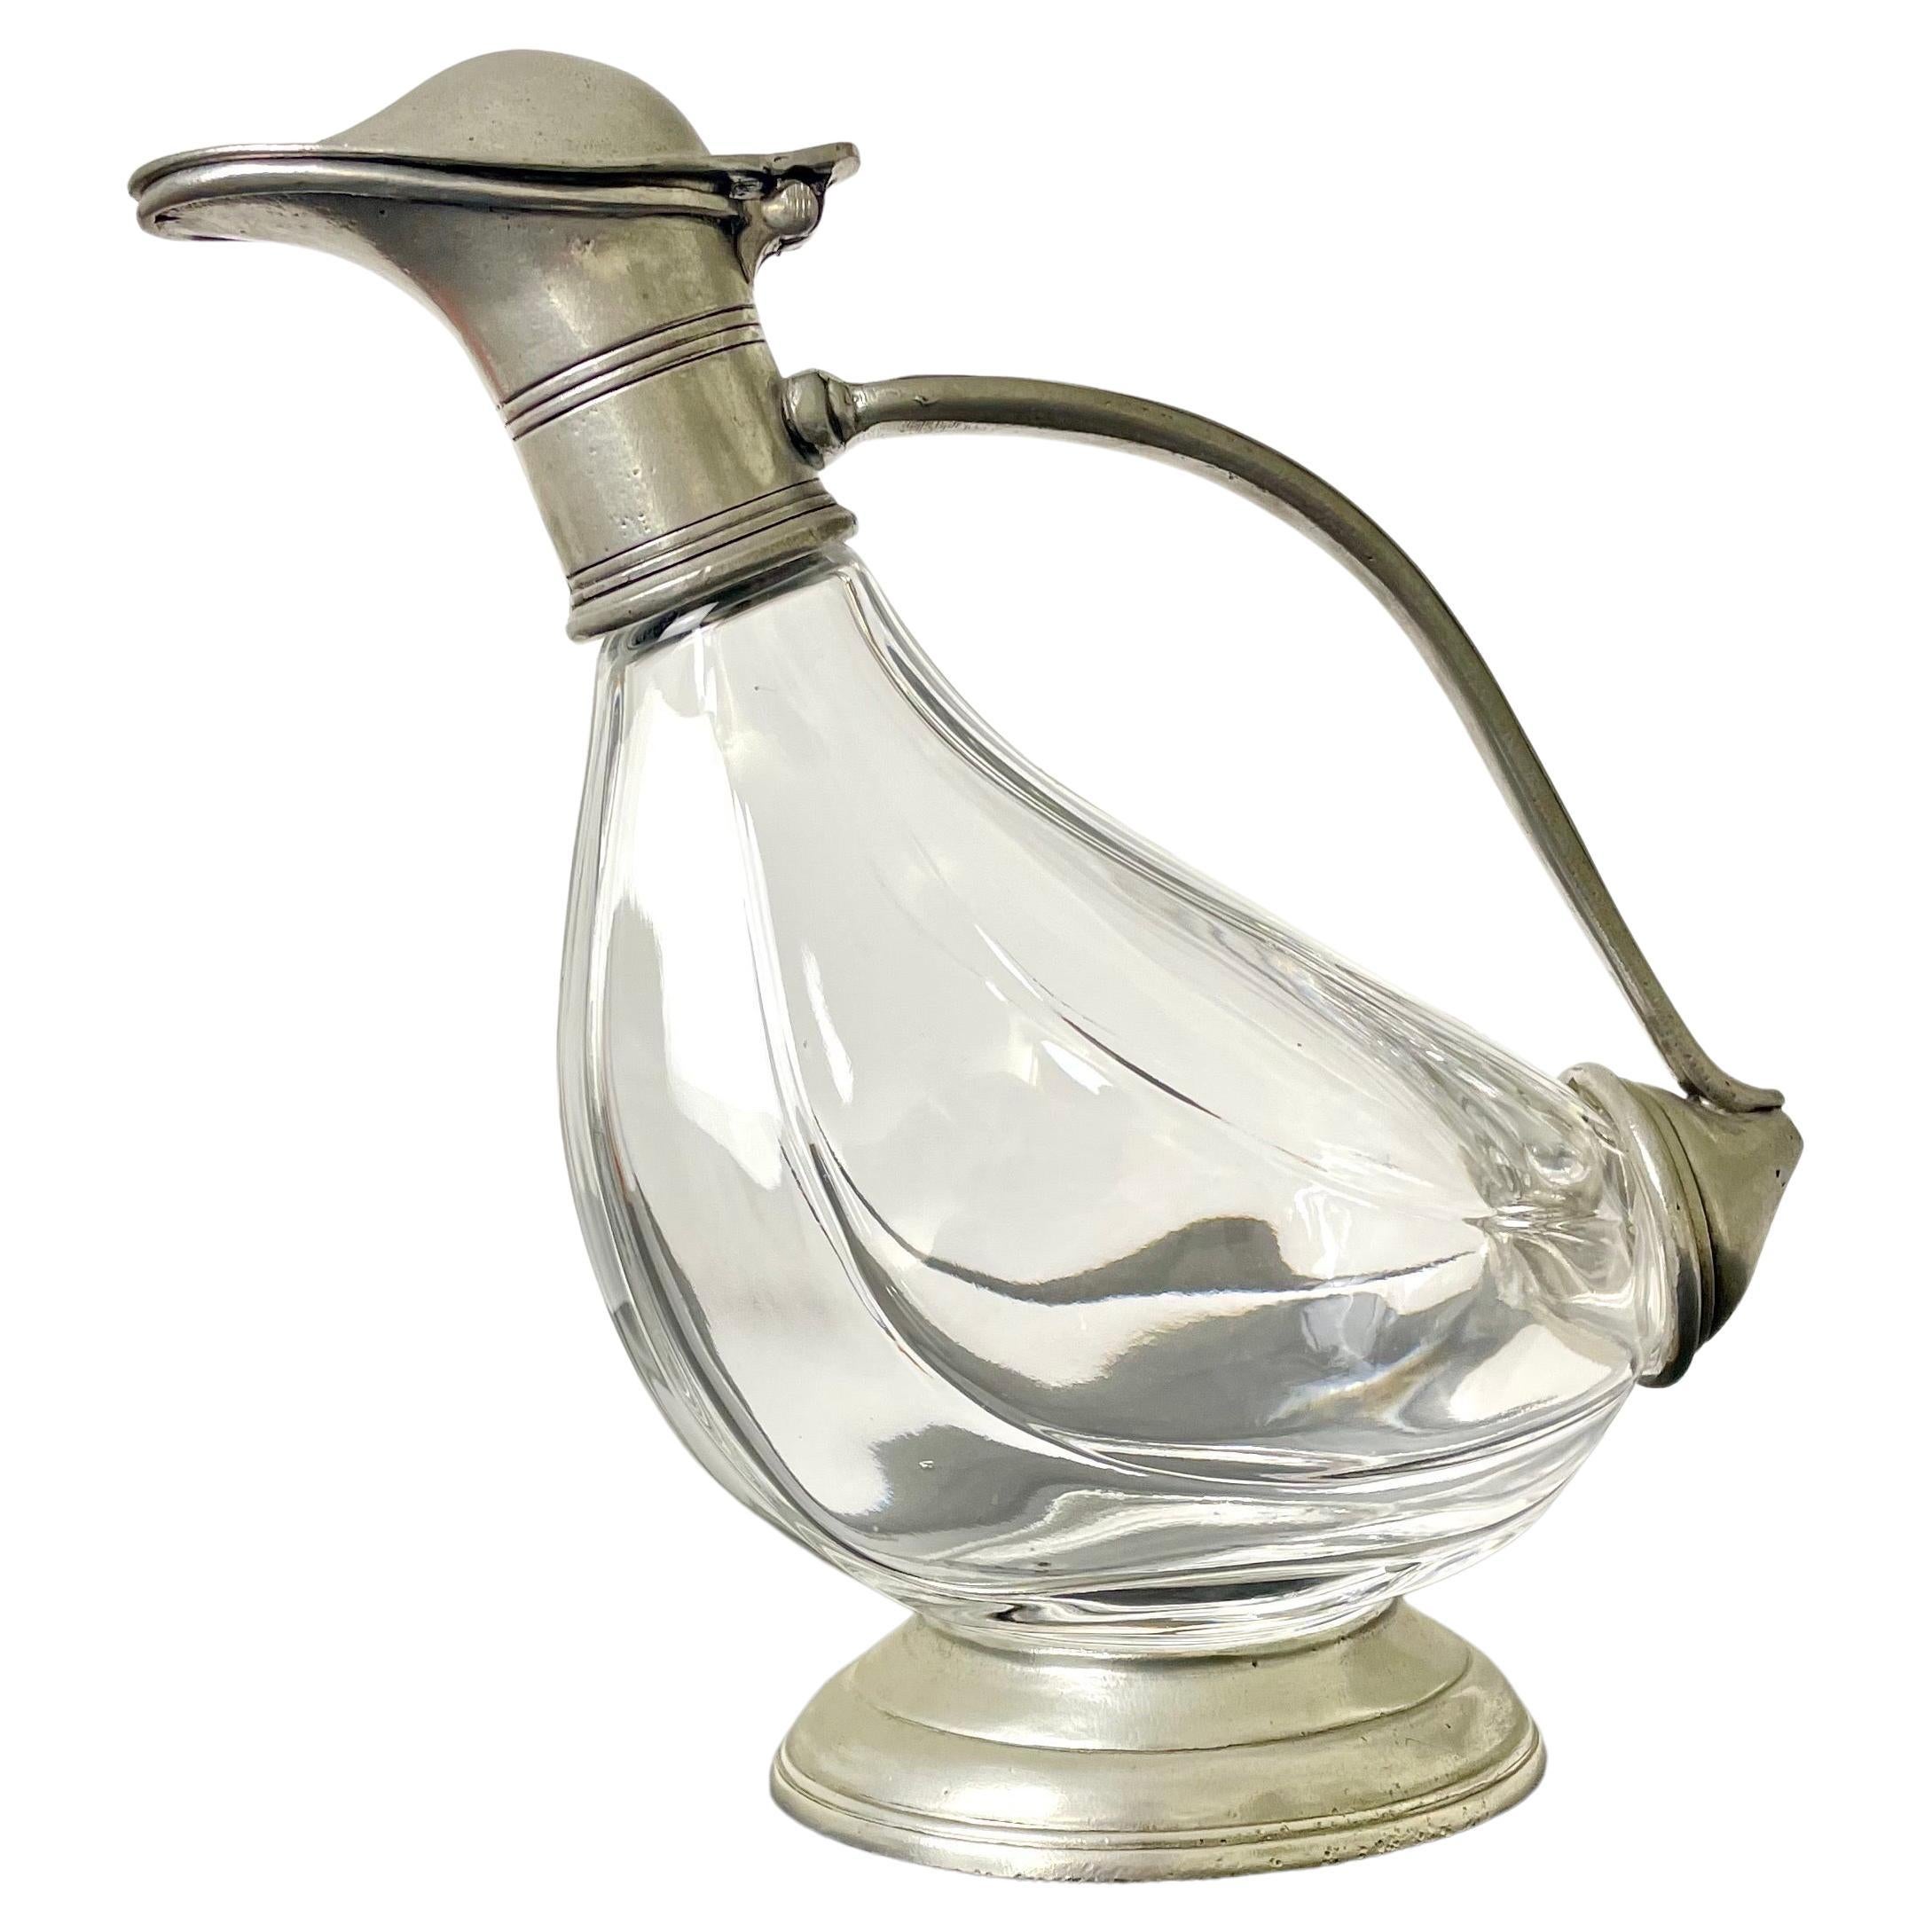 Vintage wine decanter made of glass. 1940 - 1950